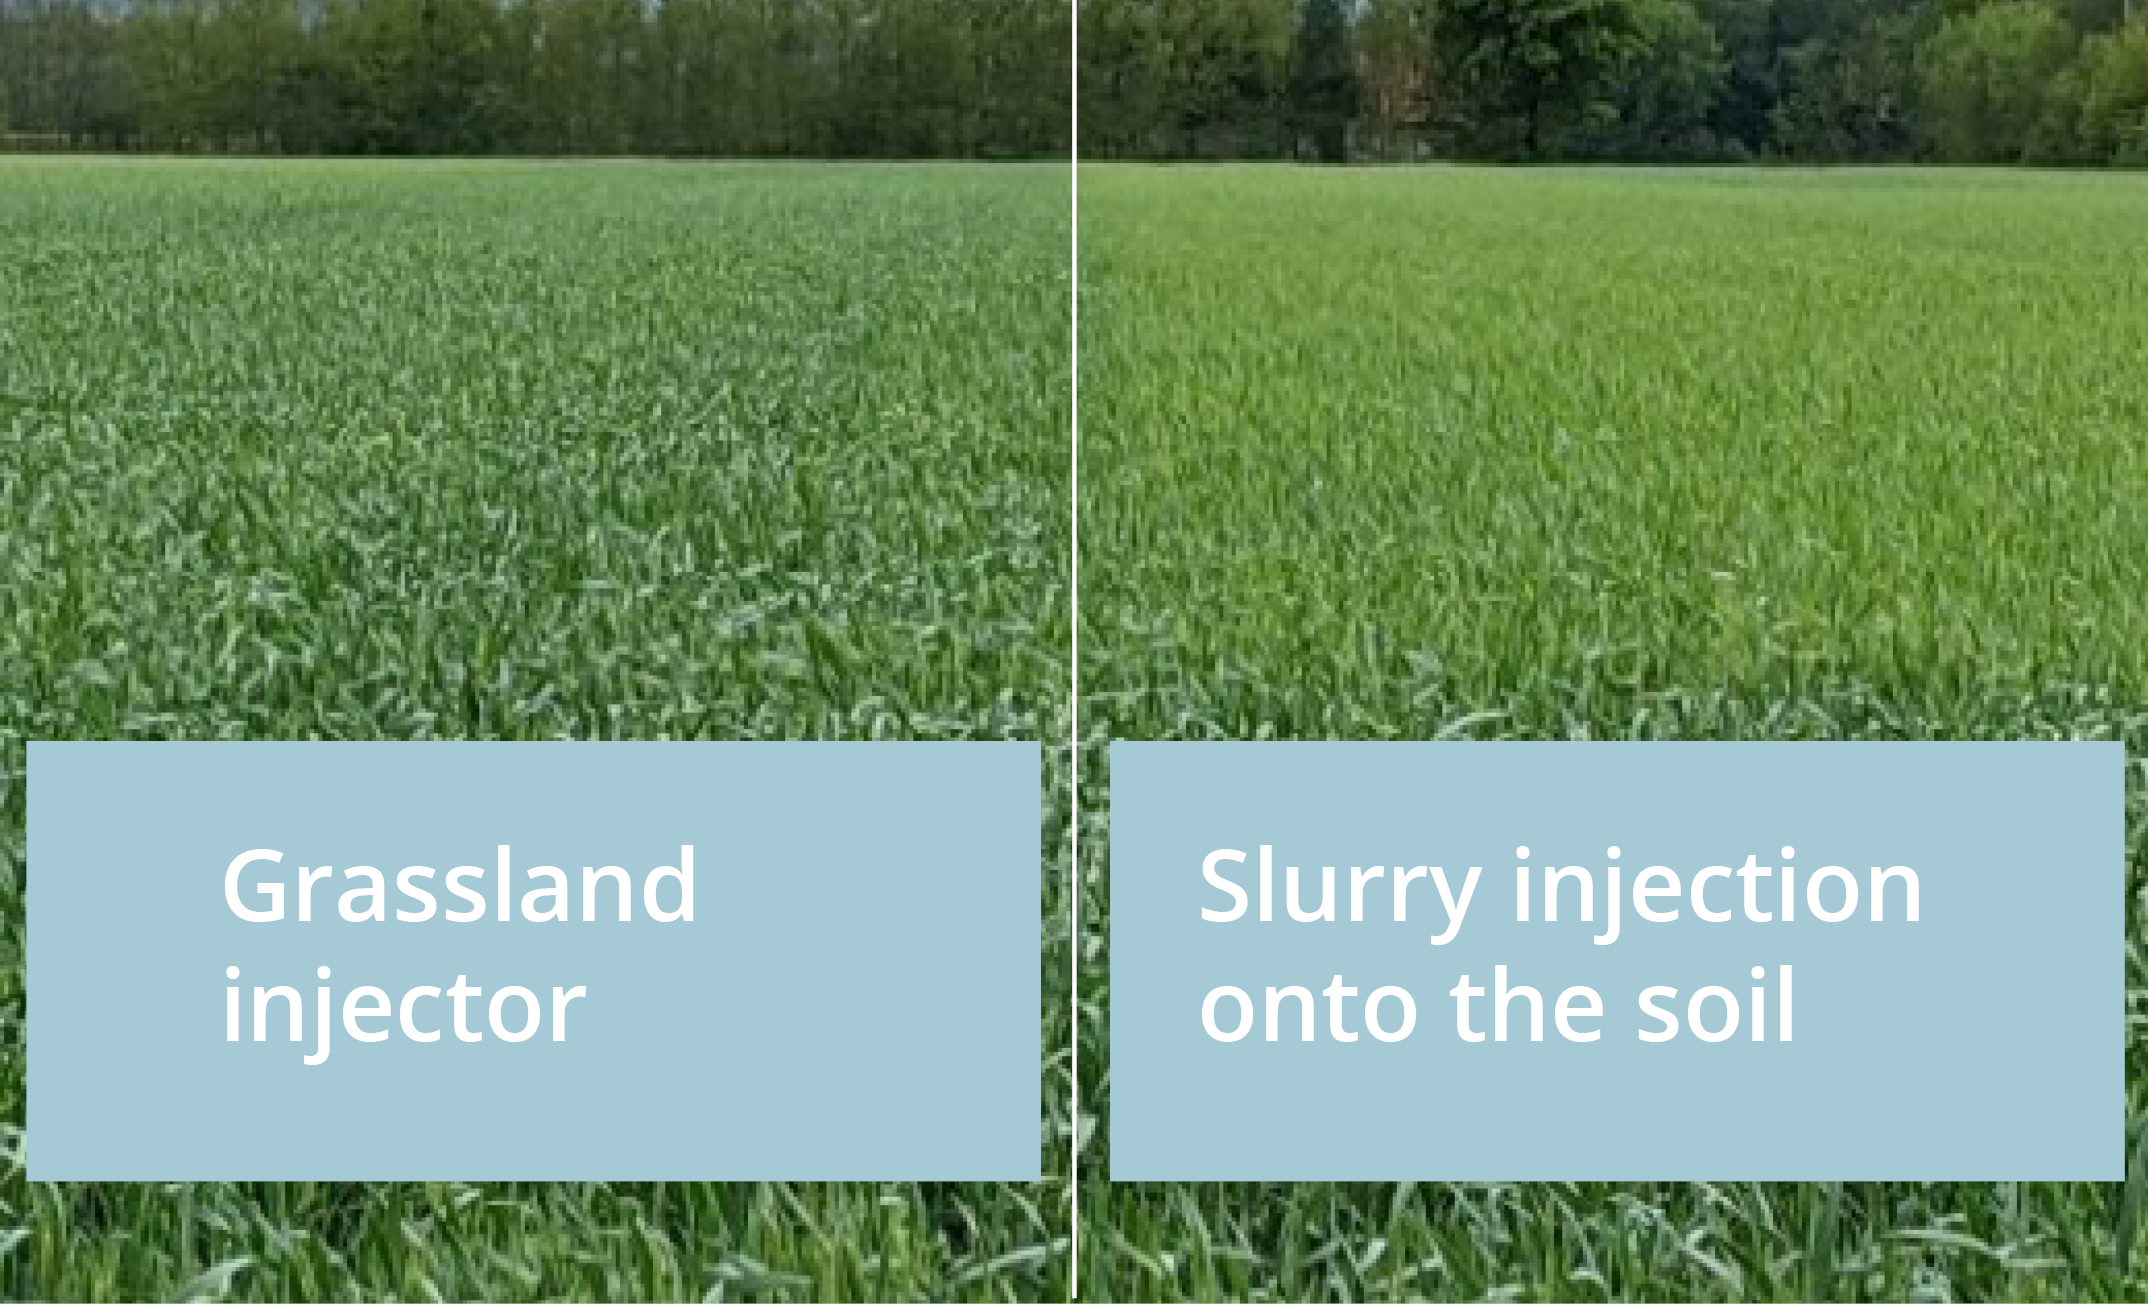 Save 240 kg of fertiliser per hectare with the right manure technology